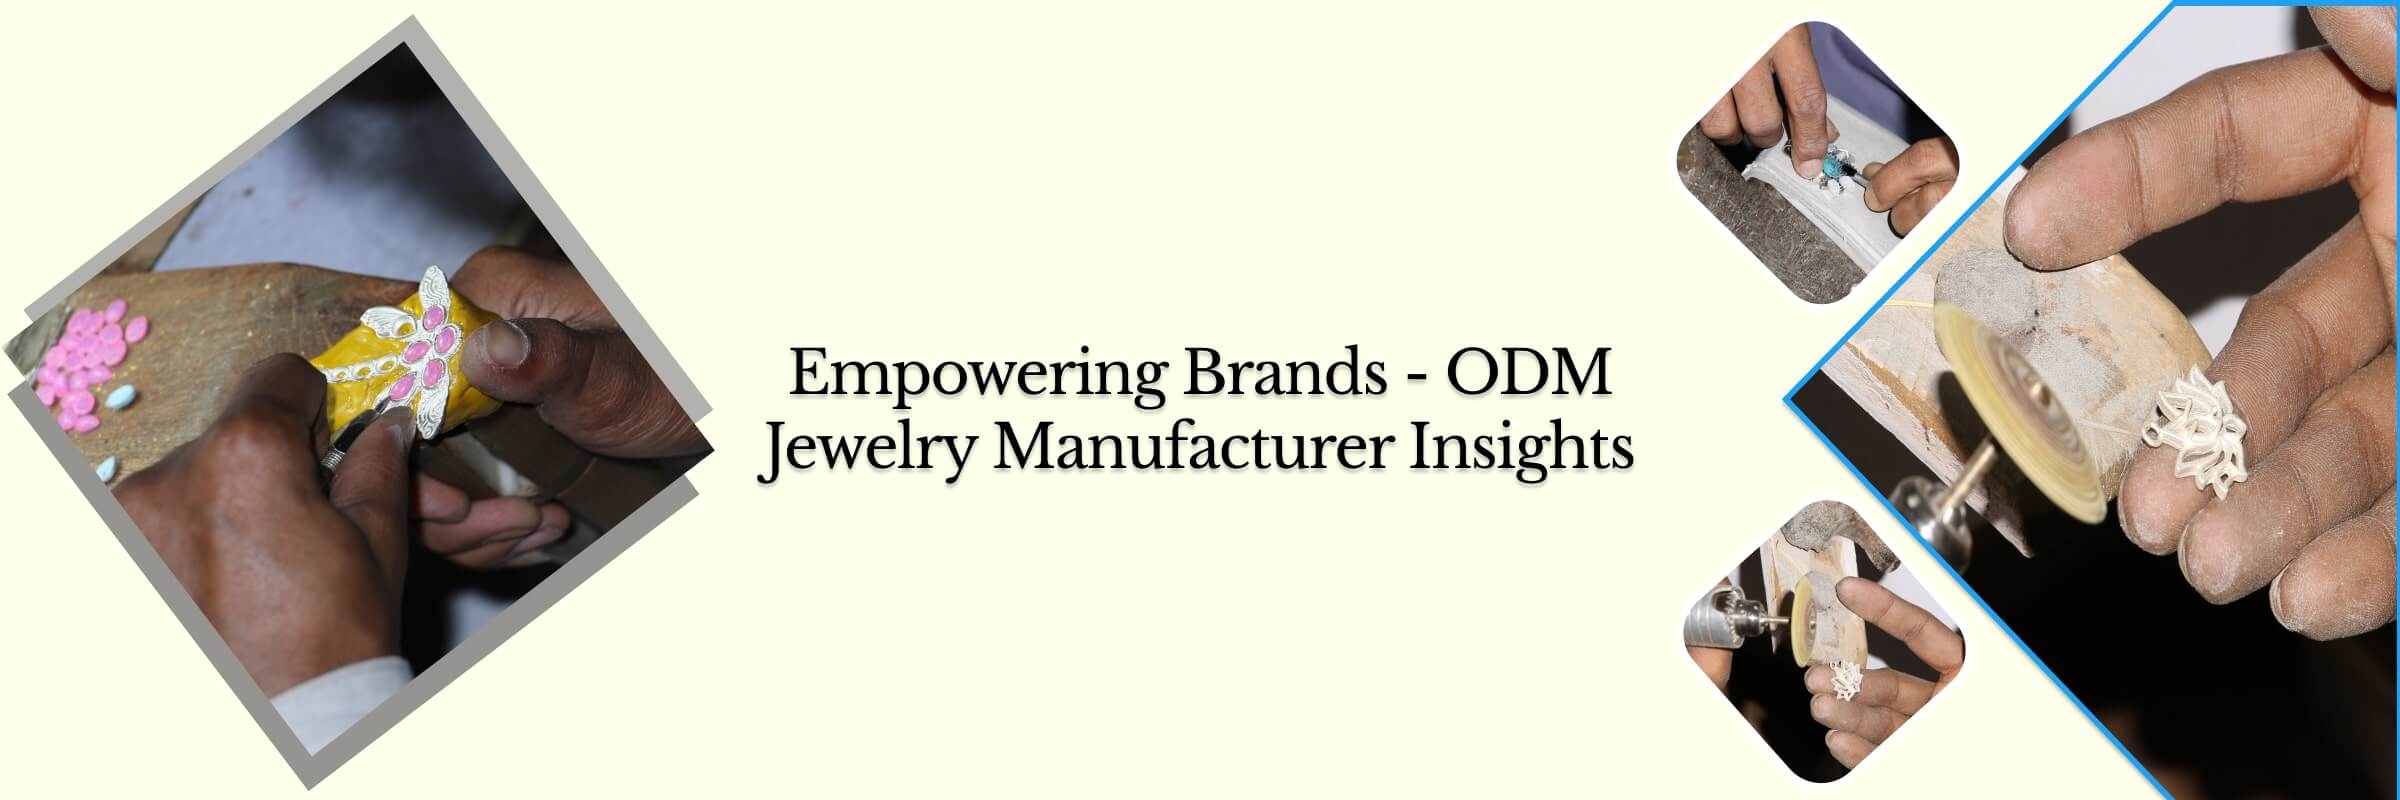 Understanding the Role of ODM Jewelry Manufacturers and Suppliers